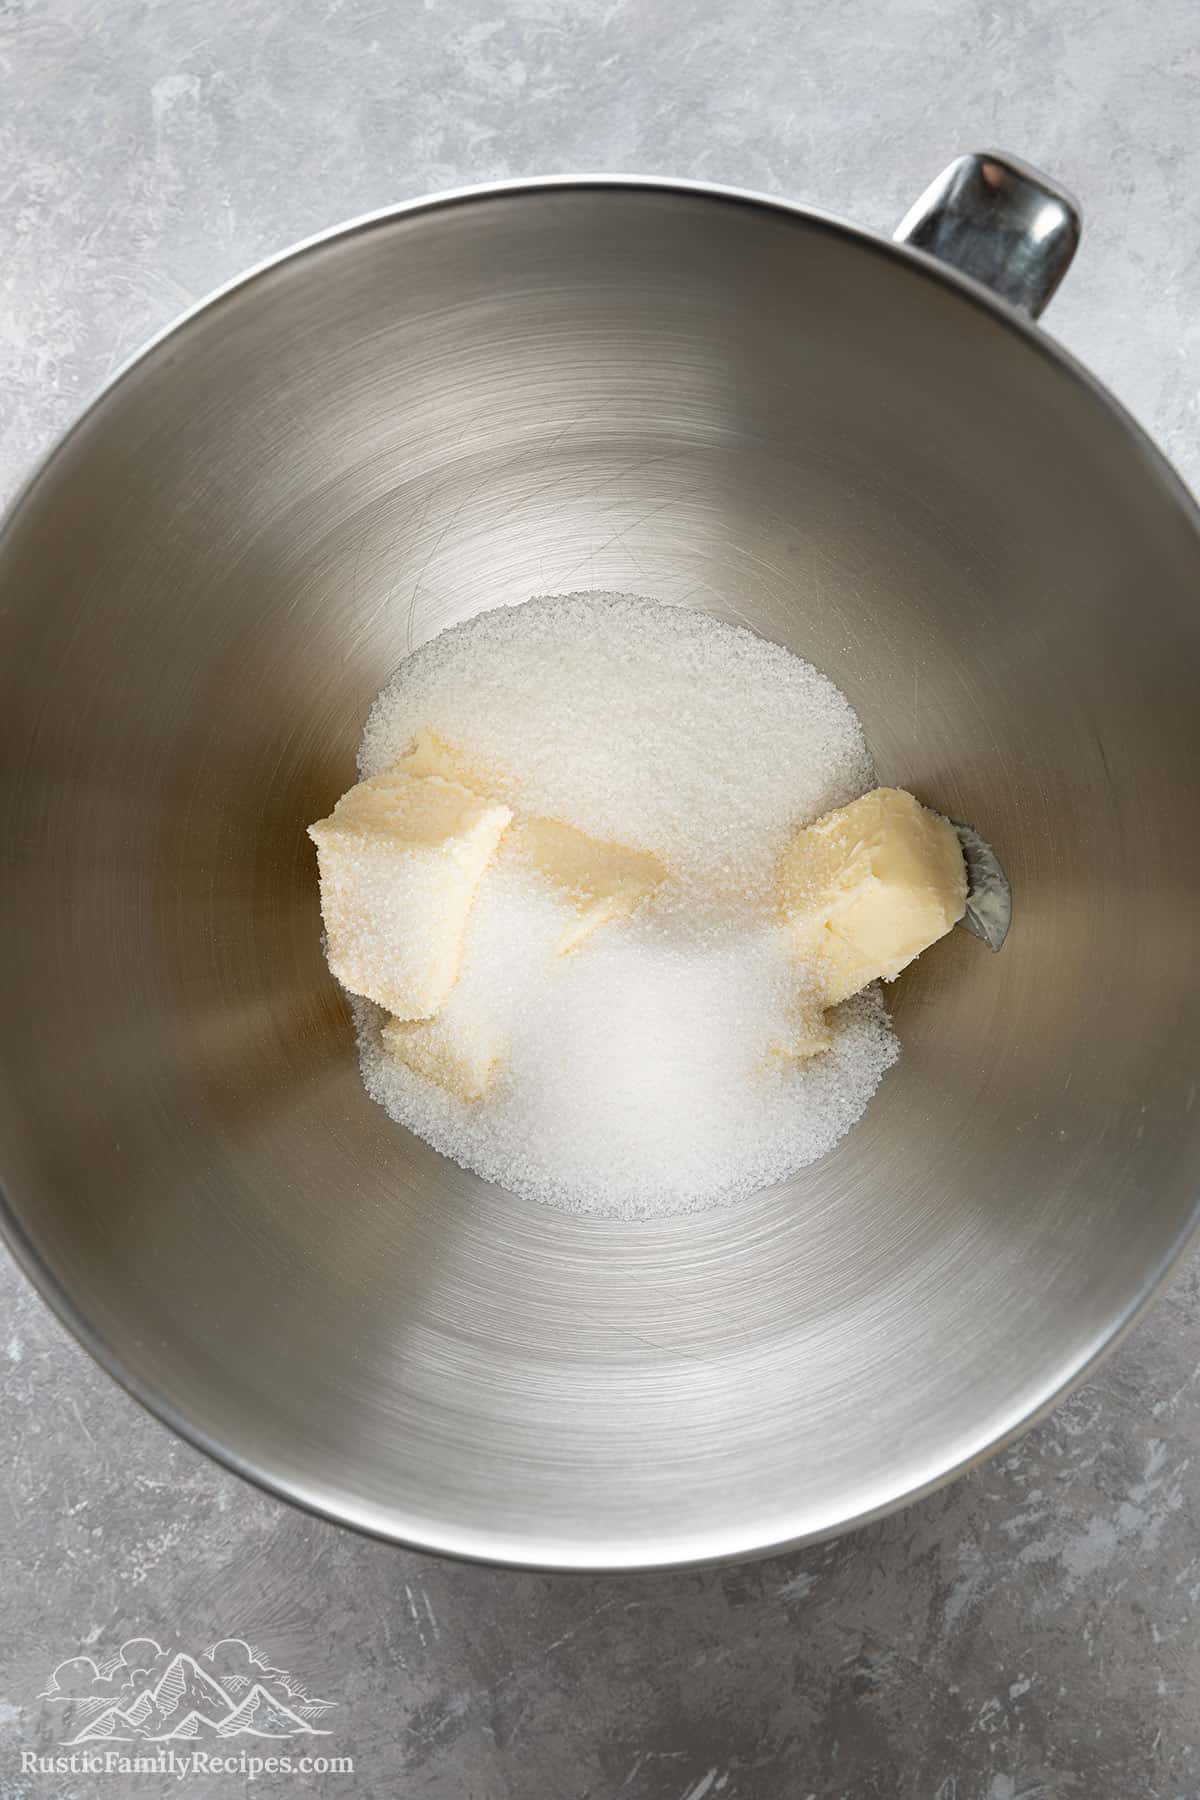 Sugar and butter in a mixing bowl before creaming.